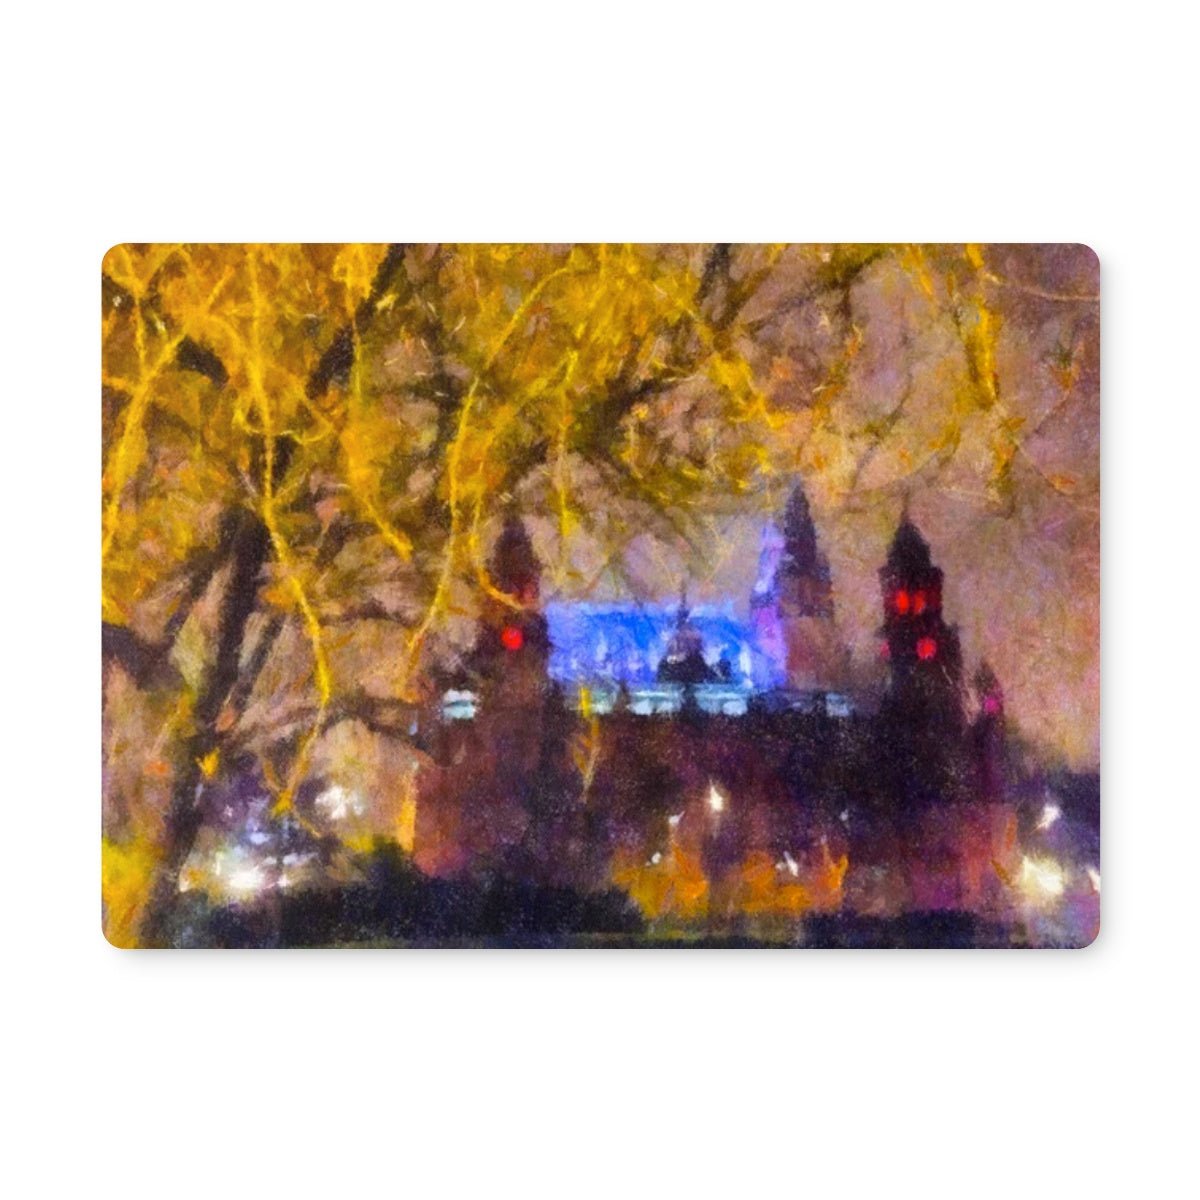 Kelvingrove Nights Glasgow Art Gifts Placemat-Placemats-Edinburgh & Glasgow Art Gallery-6 Placemats-Paintings, Prints, Homeware, Art Gifts From Scotland By Scottish Artist Kevin Hunter